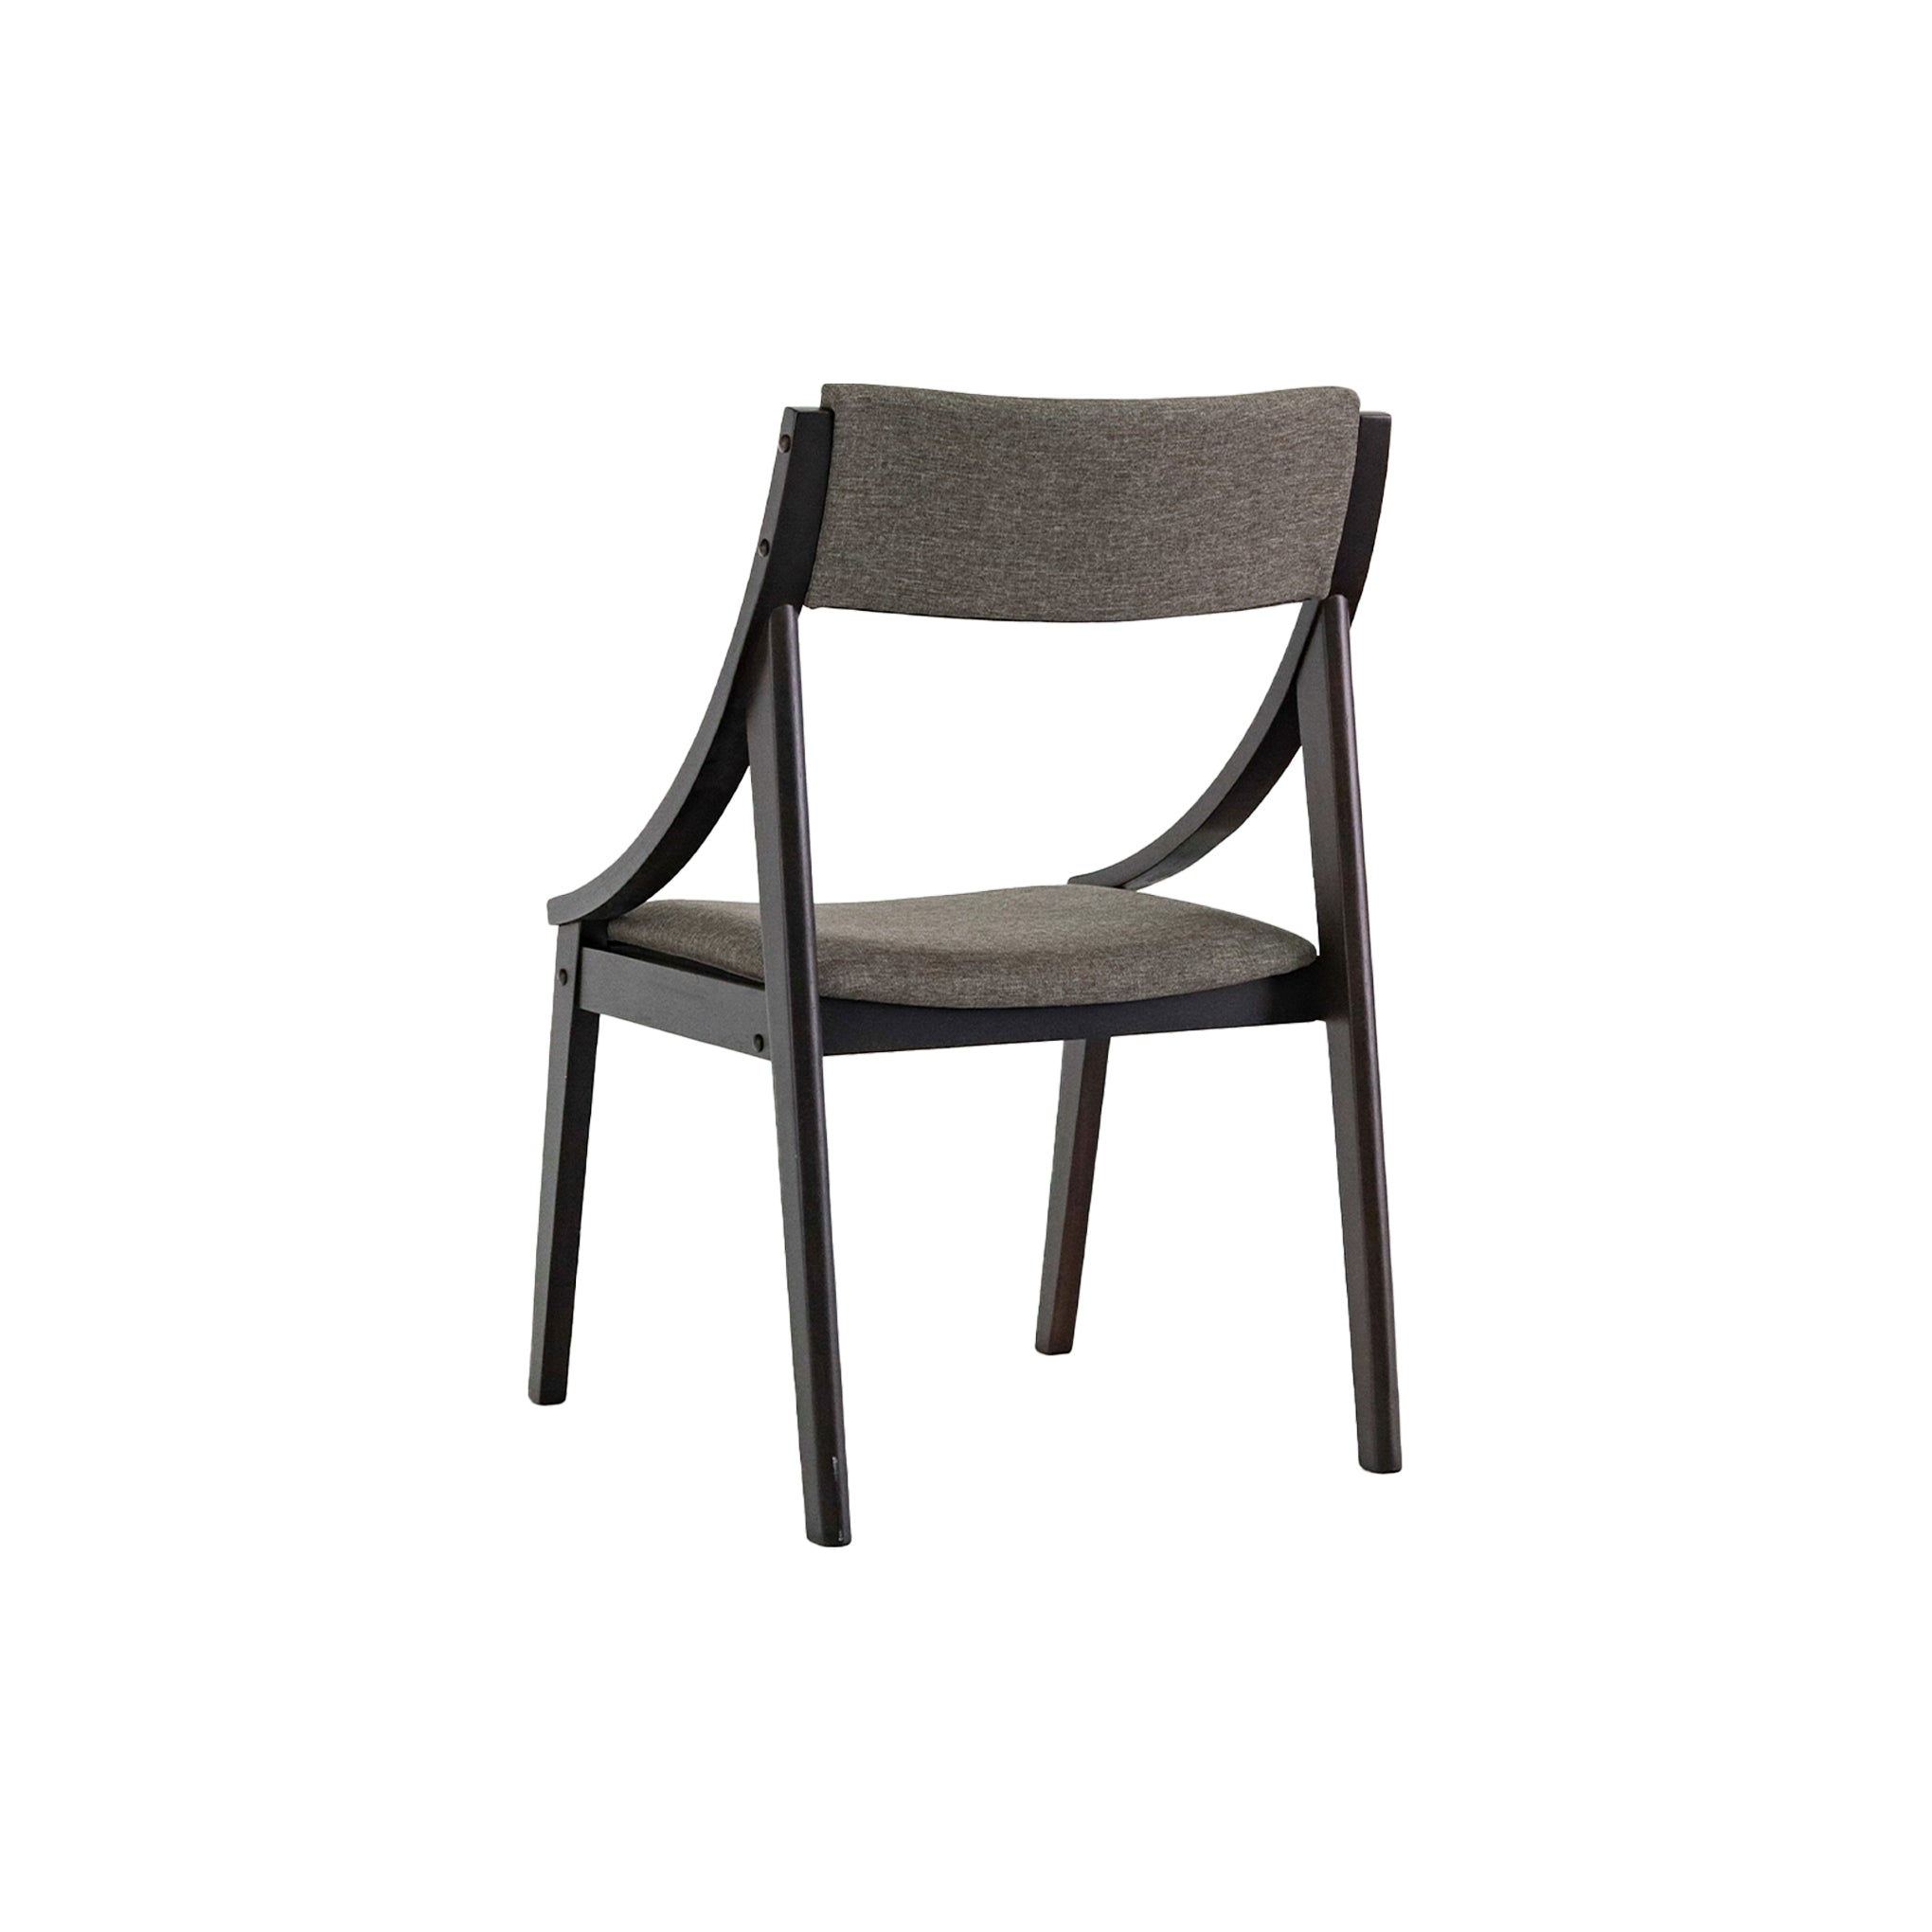 Dawenge Wooden Dining Chair with Cushion Seat